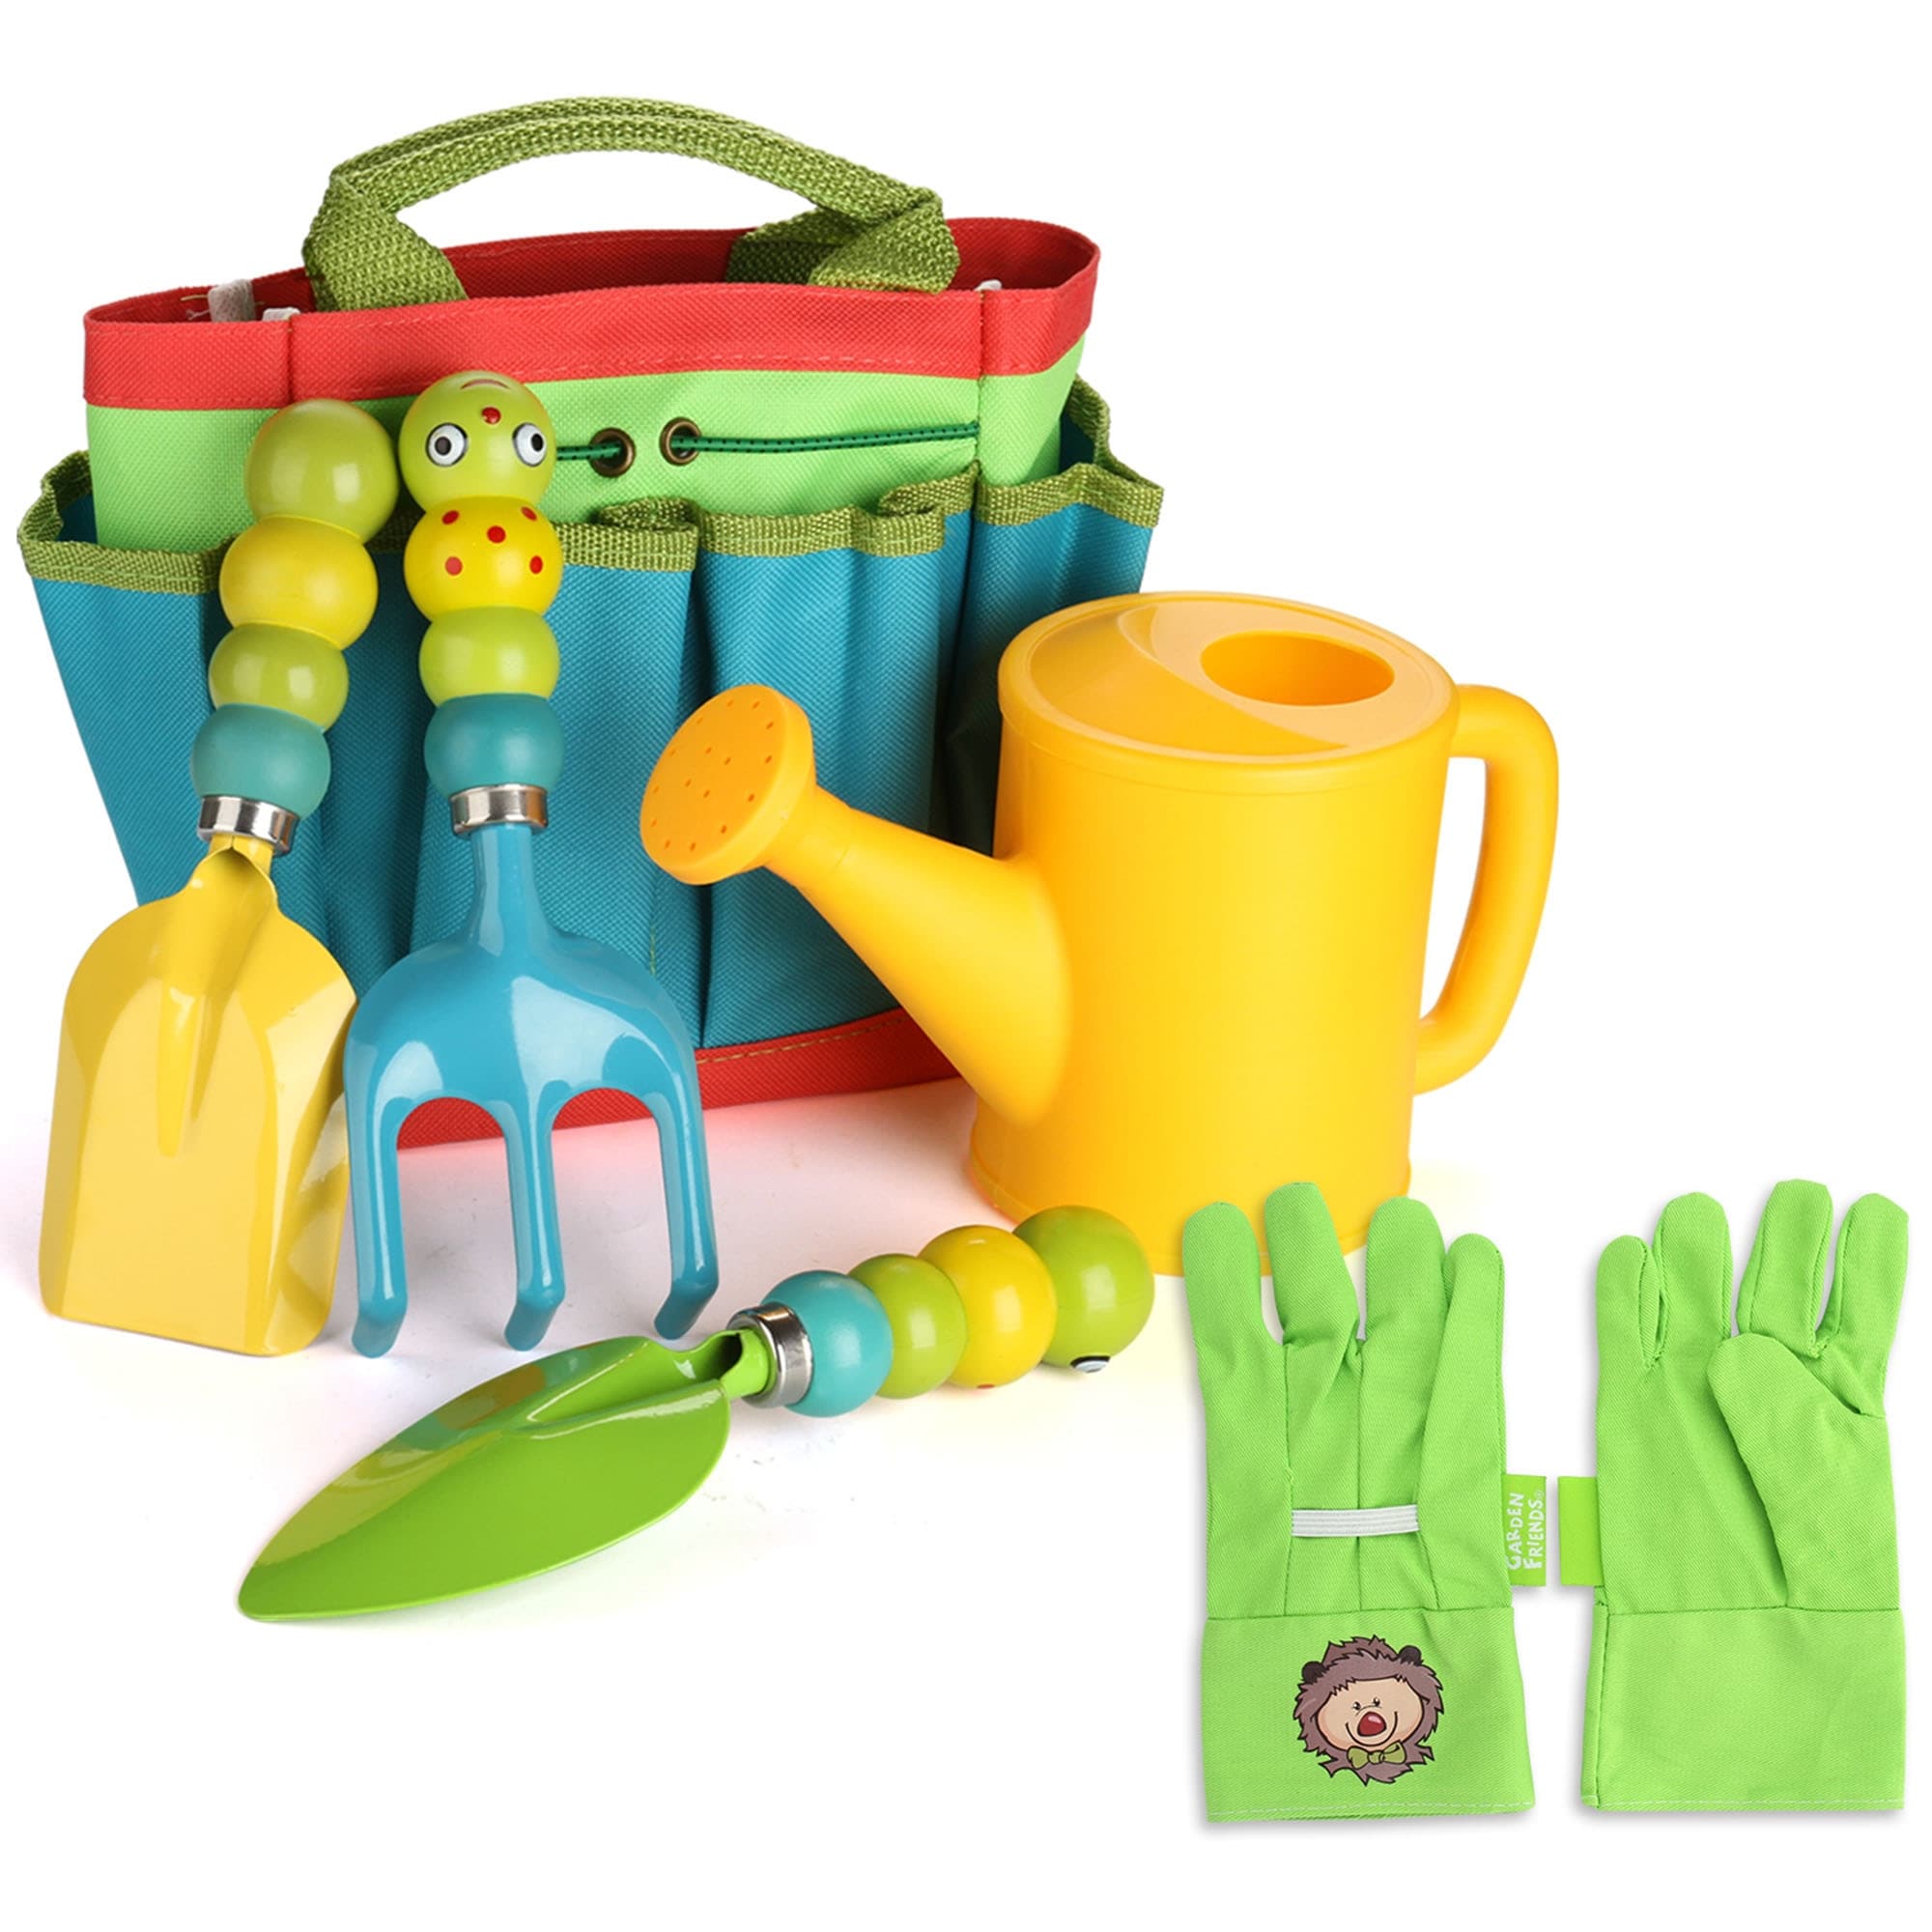 Sports Outdoor Play Gardening Tools Sports Outdoor Play Kids